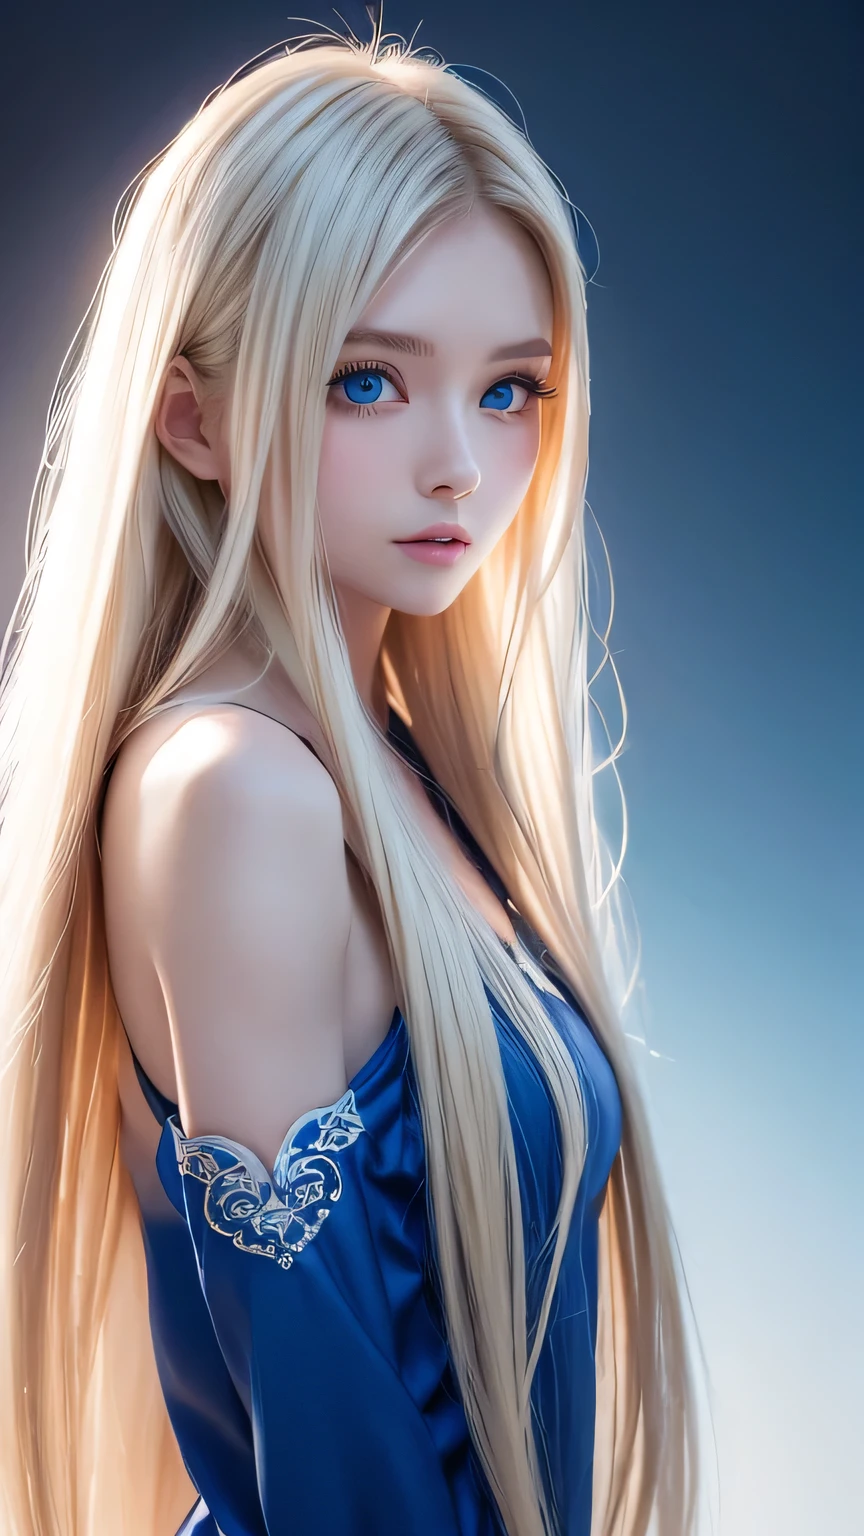 Very beautiful super long straight blonde hair、Mastepiece, Best Quality, Illustration, Super detailed, Fine details, High resolution, 8K Denden Wallpaper, Perfect dynamic composition, Beautiful detailed pale very bright blue eyes, Fitness Wear, Natural color lip、Very white and beautiful bright skin